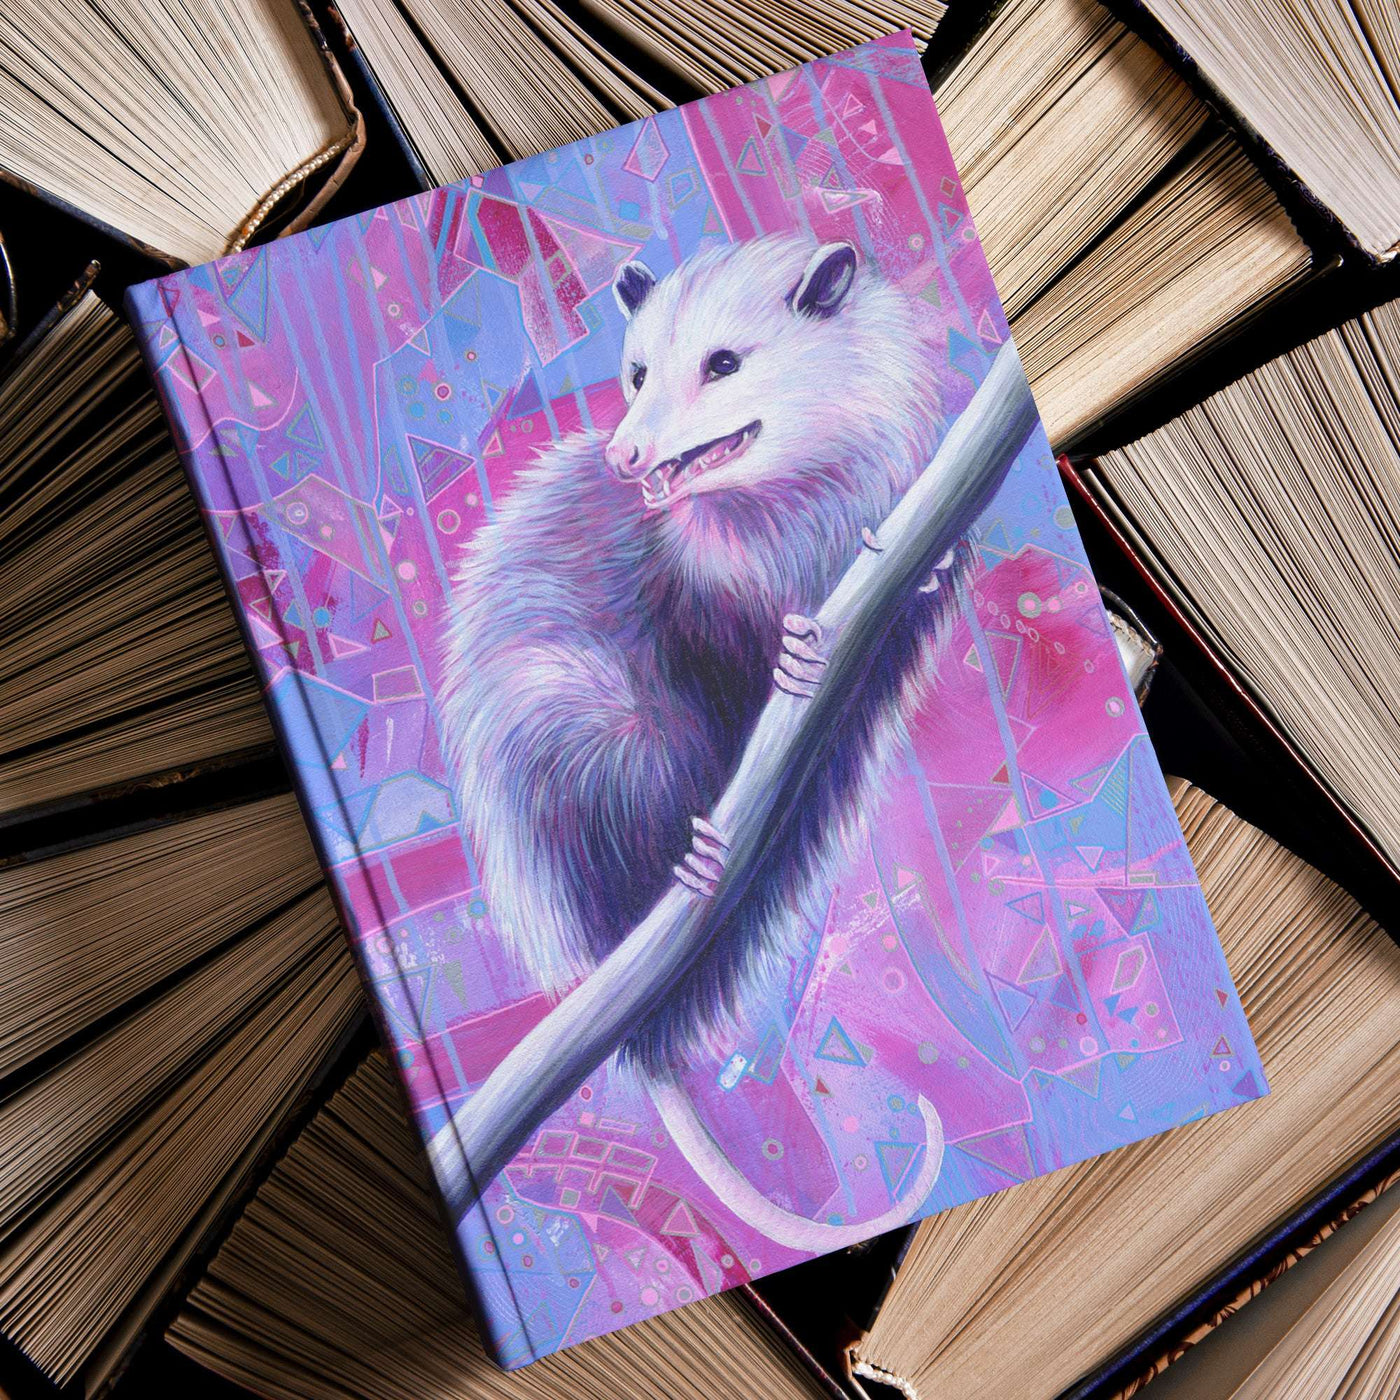 A Opossum Journal with a vibrant illustration of an opossum resting on a tree branch, set on top of a pile of old books.